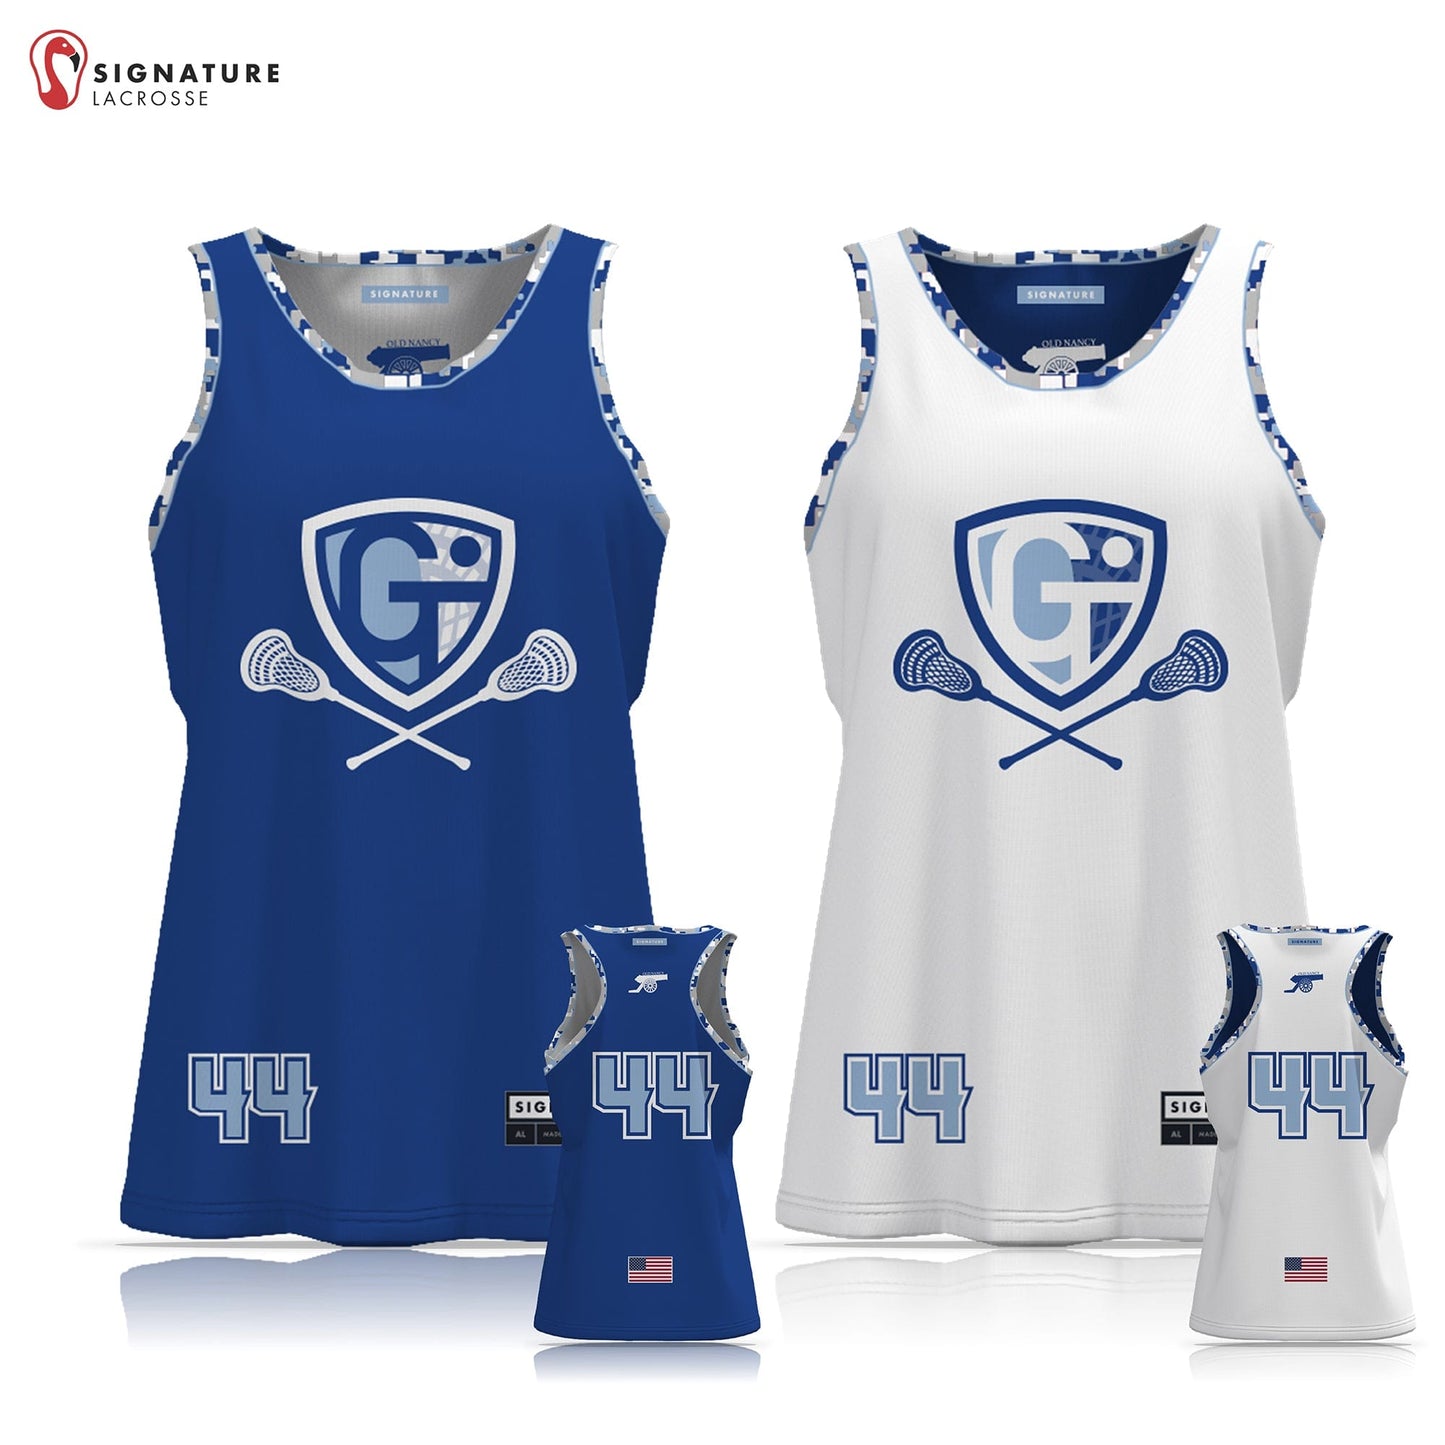 Georgetown-Triton Youth Lacrosse Women's Player Reversible Game Pinnie: 1-2 Signature Lacrosse